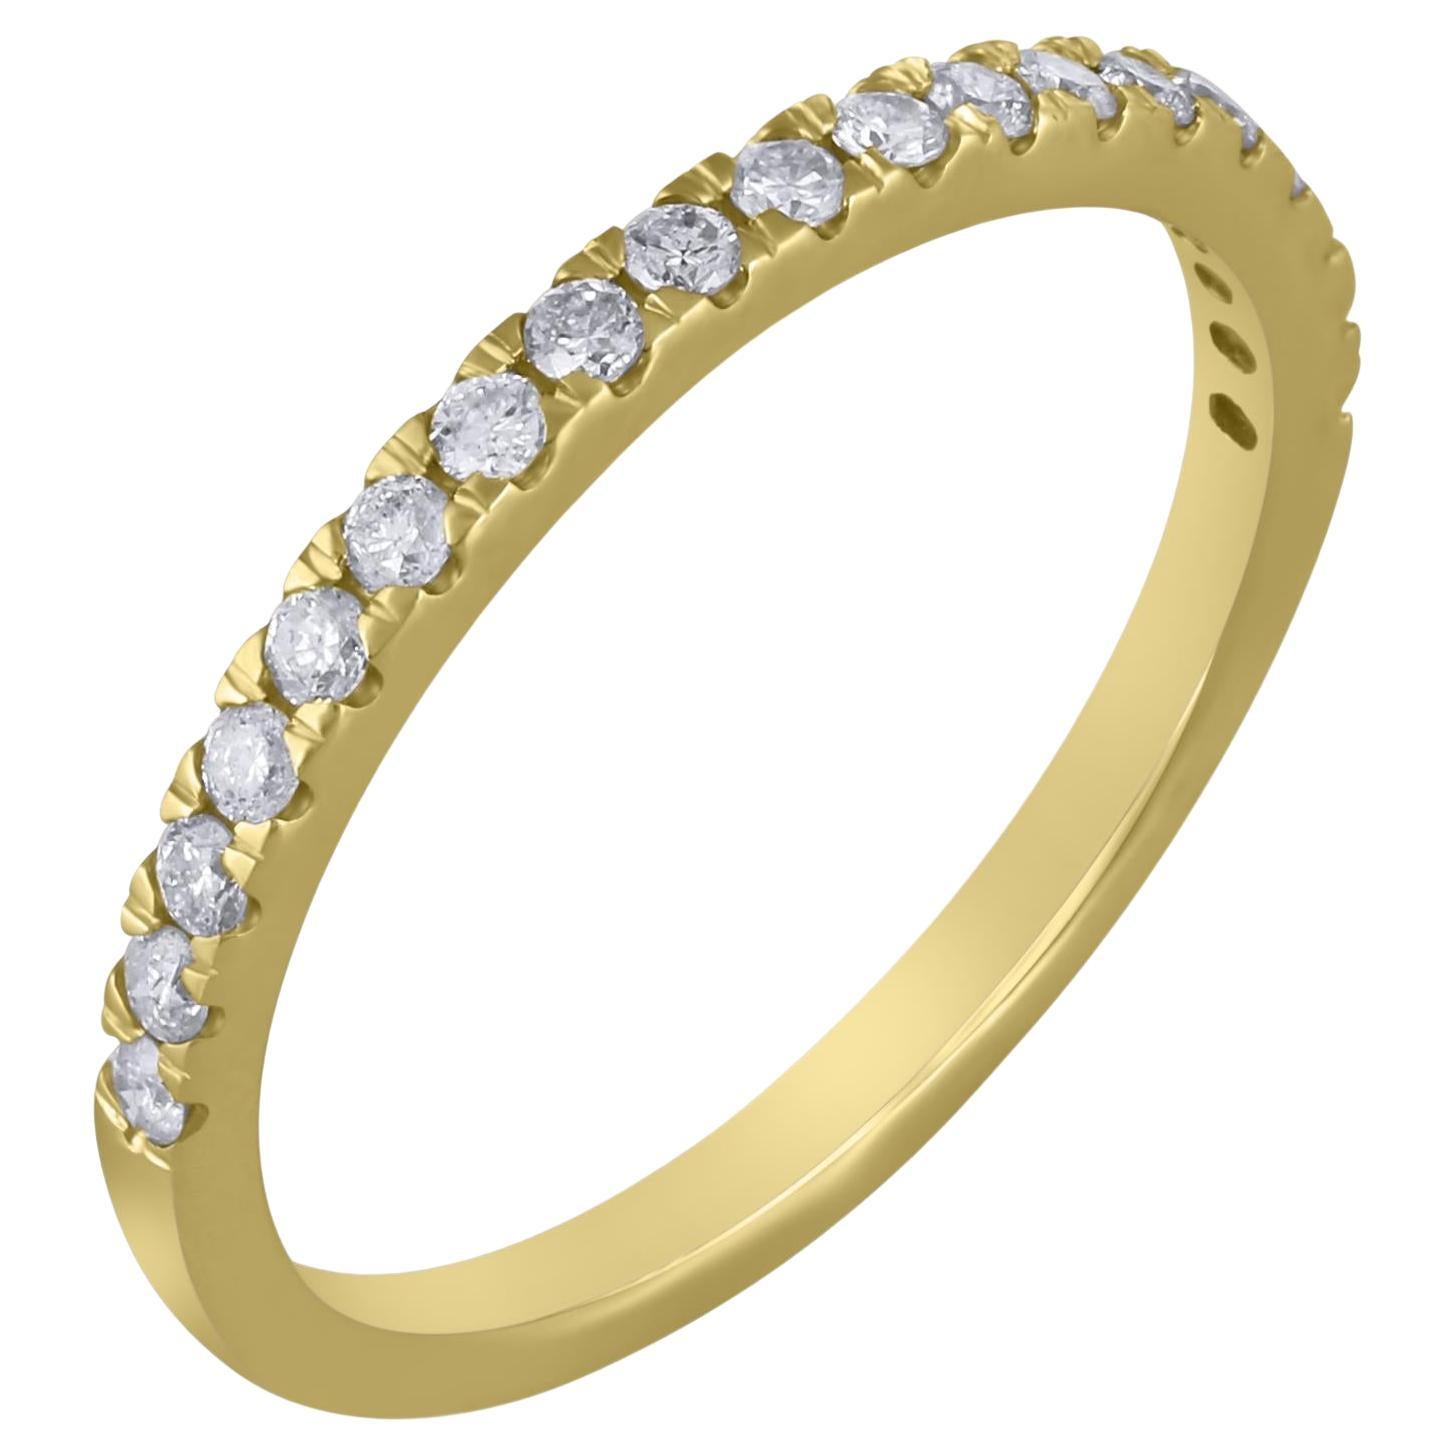 Luxle 0.28 Cttw. Round Diamond Engagement Band Ring in 14K Yellow Gold For Sale